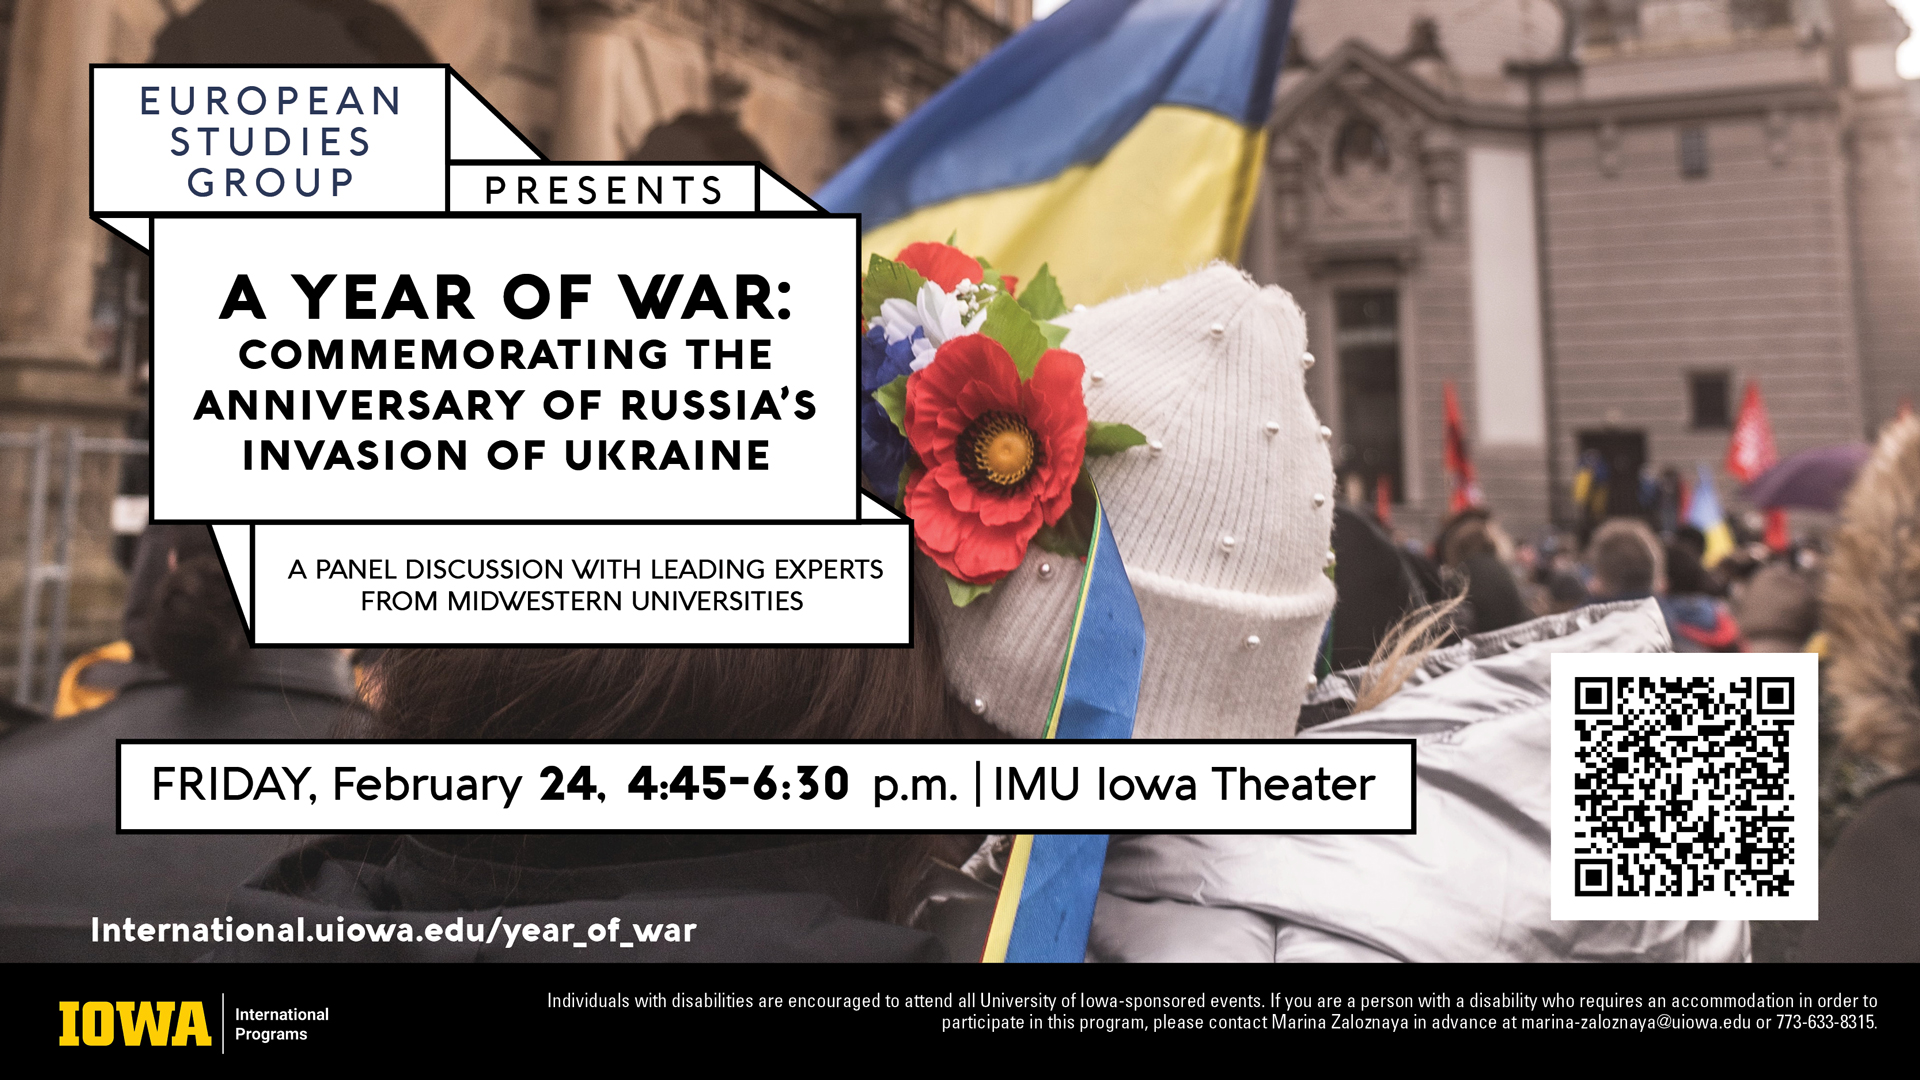 A Year of war: commemorating the anniversary of russia's invasion of ukraine. February 24 at 4:45 PM in the IMU theater.